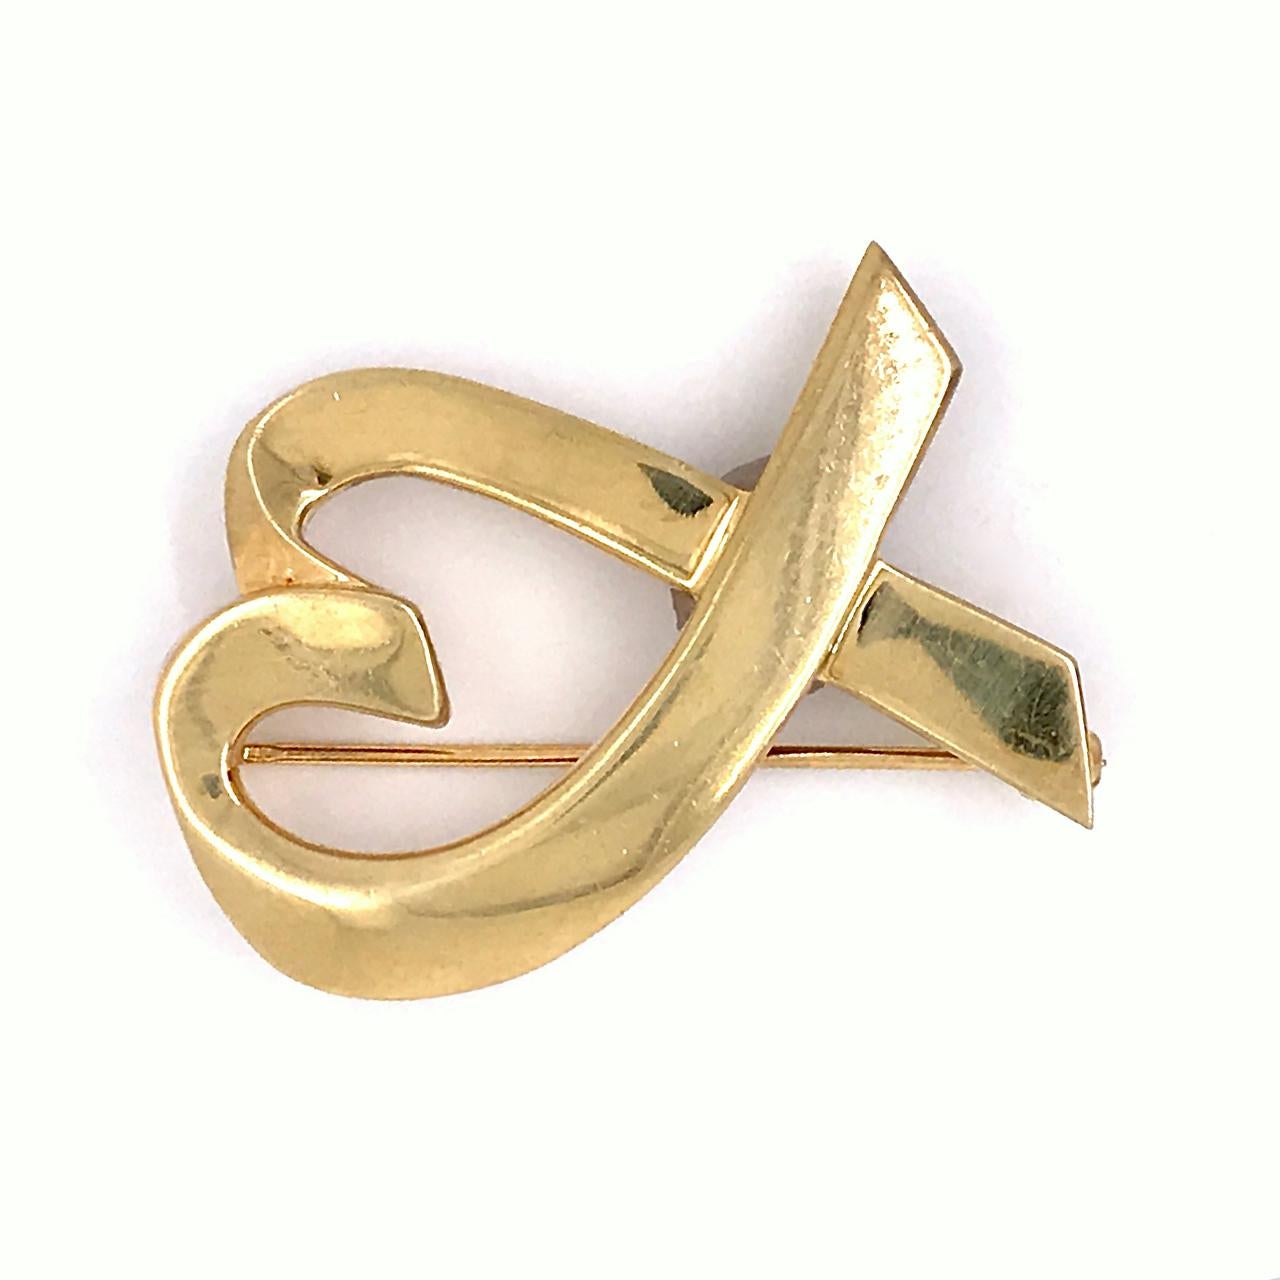 A very fine Tiffany & Co. Loving Heart brooch by Paloma Picasso.

In 18K gold.

Marked to the reverse: 750 for 18k gold fineness and Tiffany & Co. 

A soon to be iconic brooch from one of Tiffany's most renowned designers!

Height: ca. 33 mm
Width: